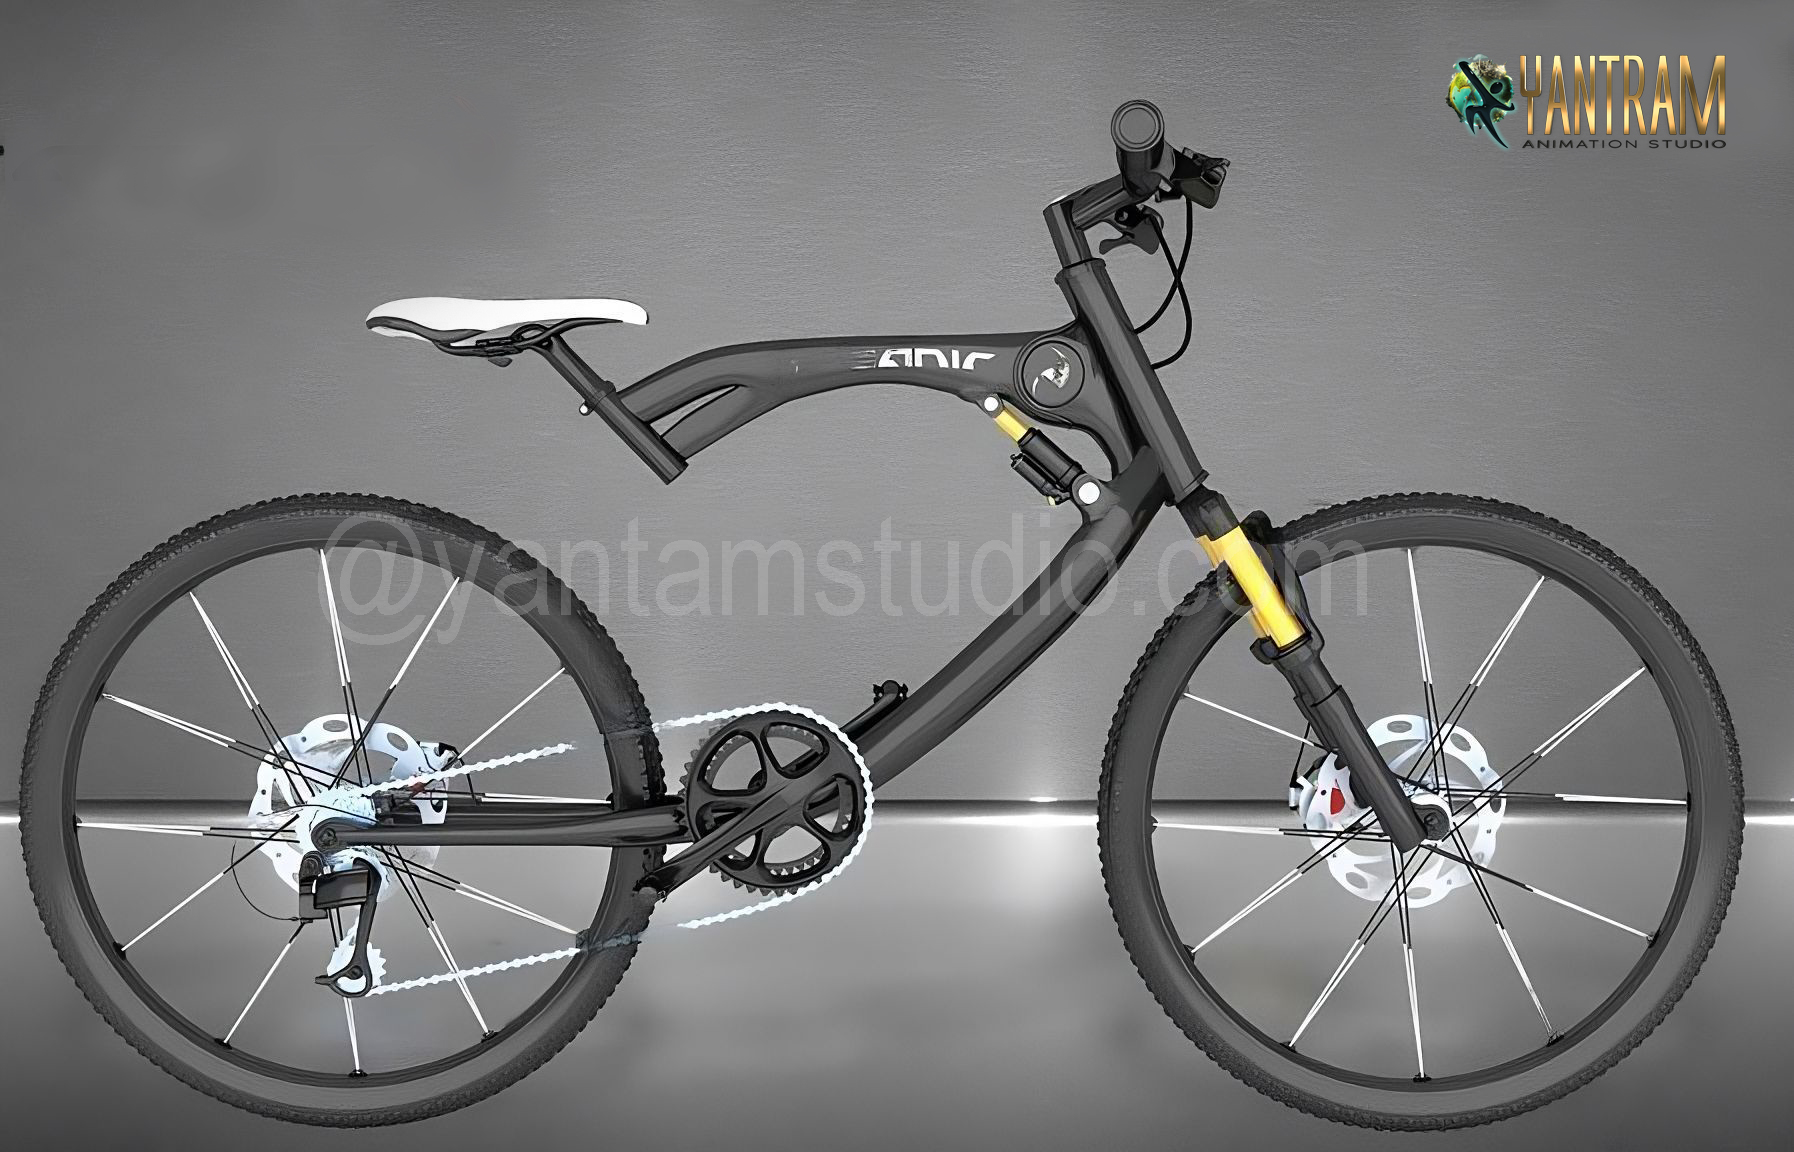 3D Product Rendering of a Track Bike in Austin, Texas by Yantram 3D Product Modeling Studio